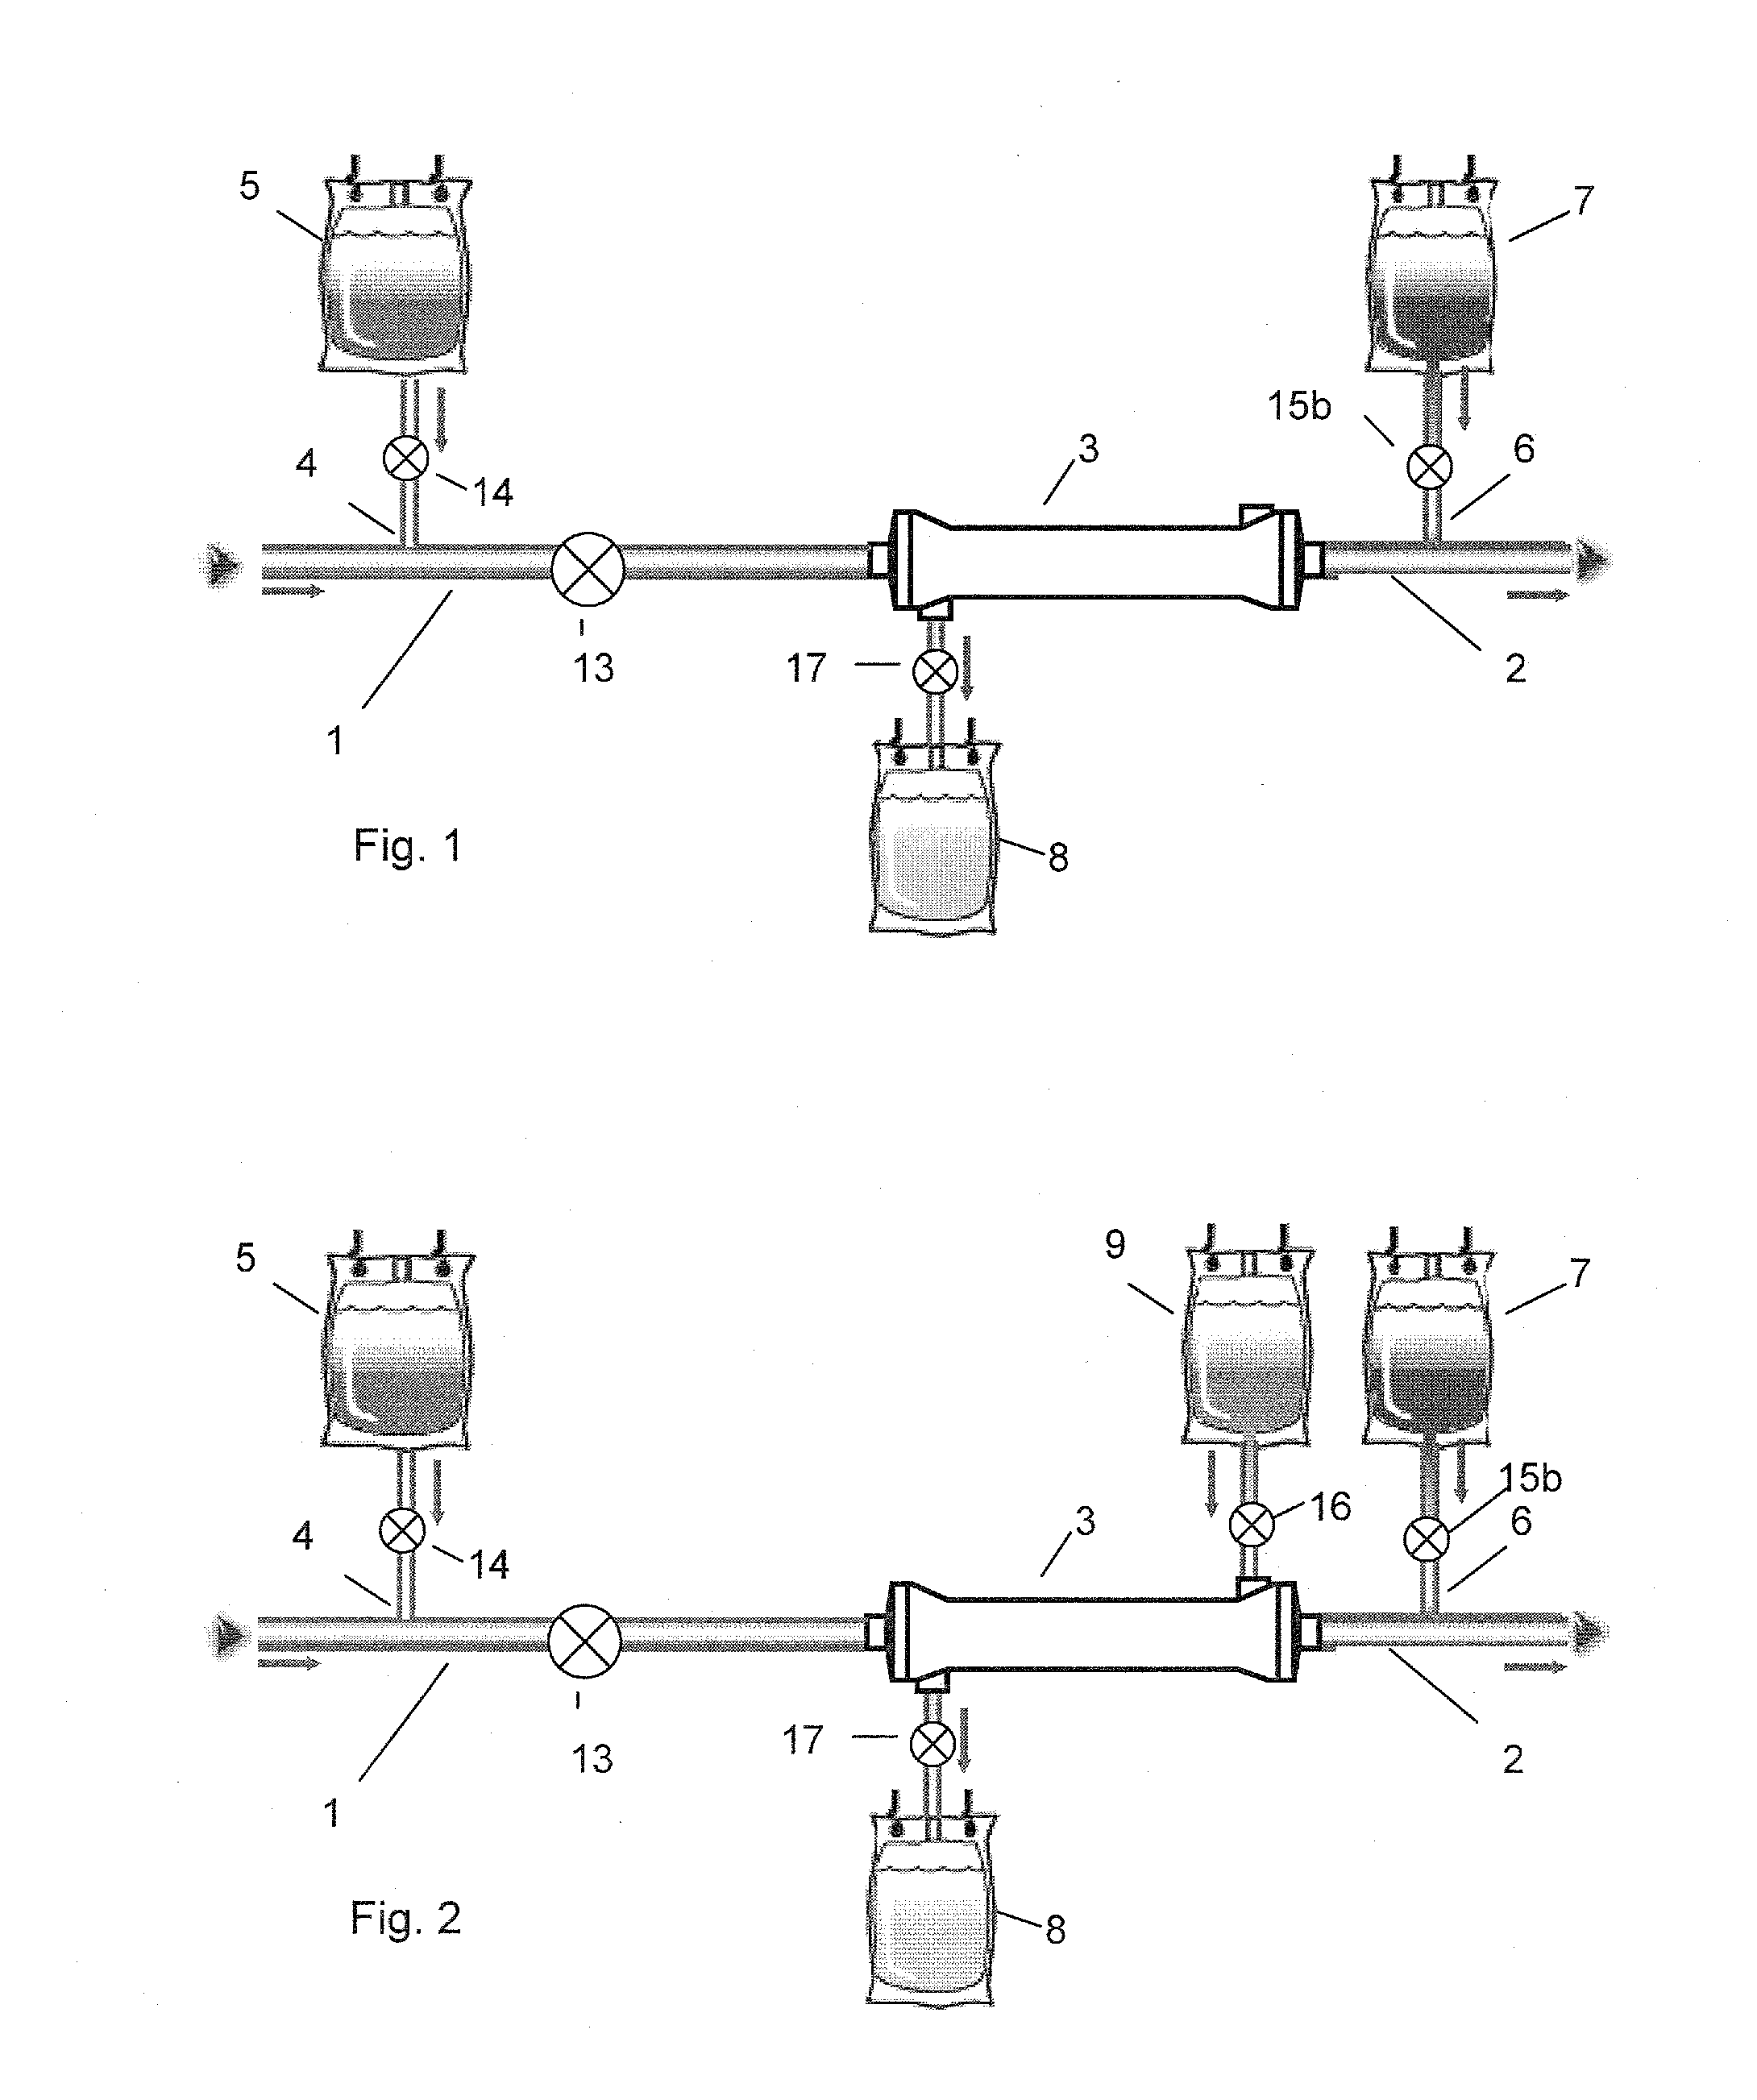 A multipart fluid system and a system for citrate anticoagualation in an extracorporeal blood circuit